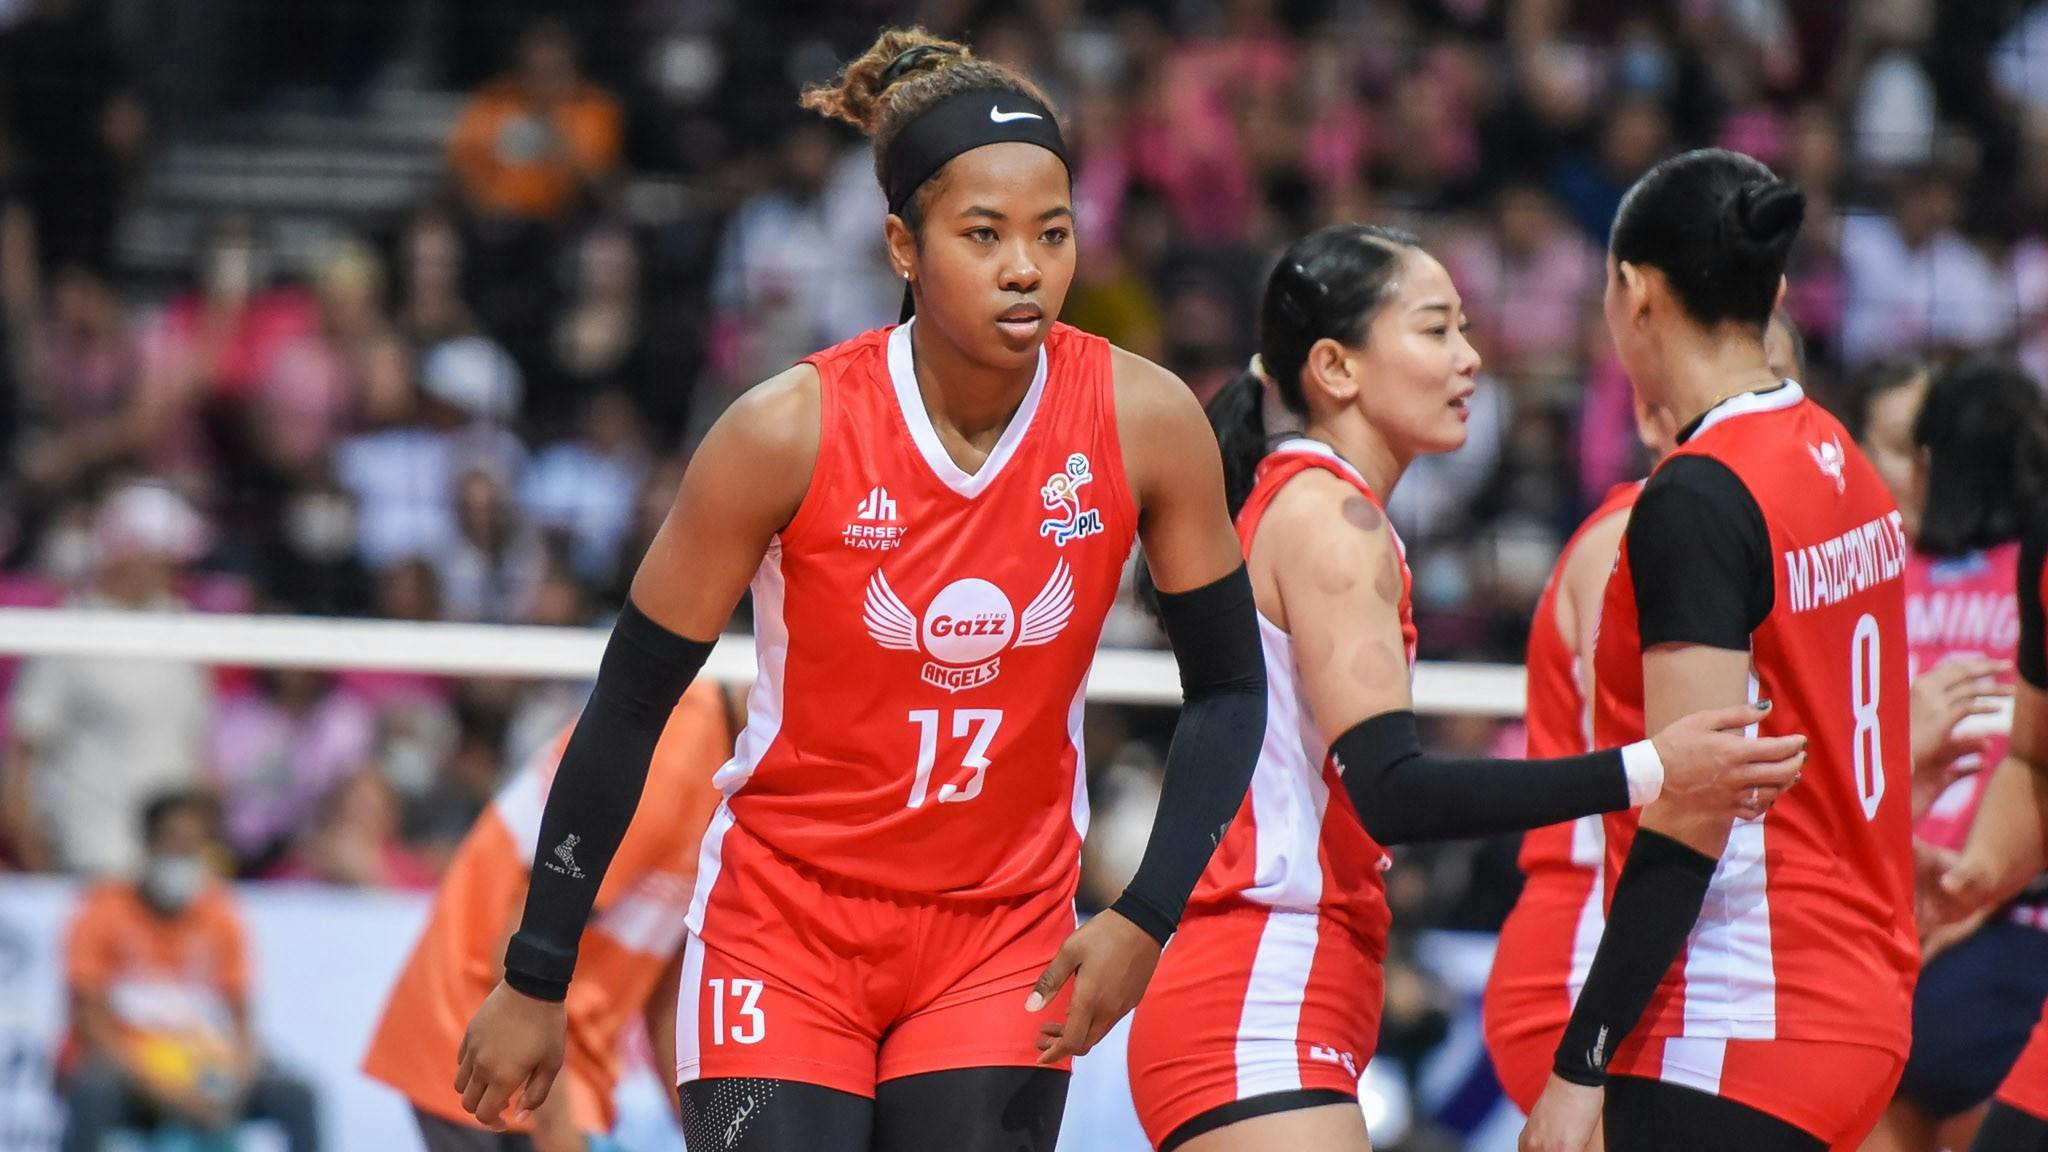 PVL: MJ Phillips coming home to play for Petro Gazz